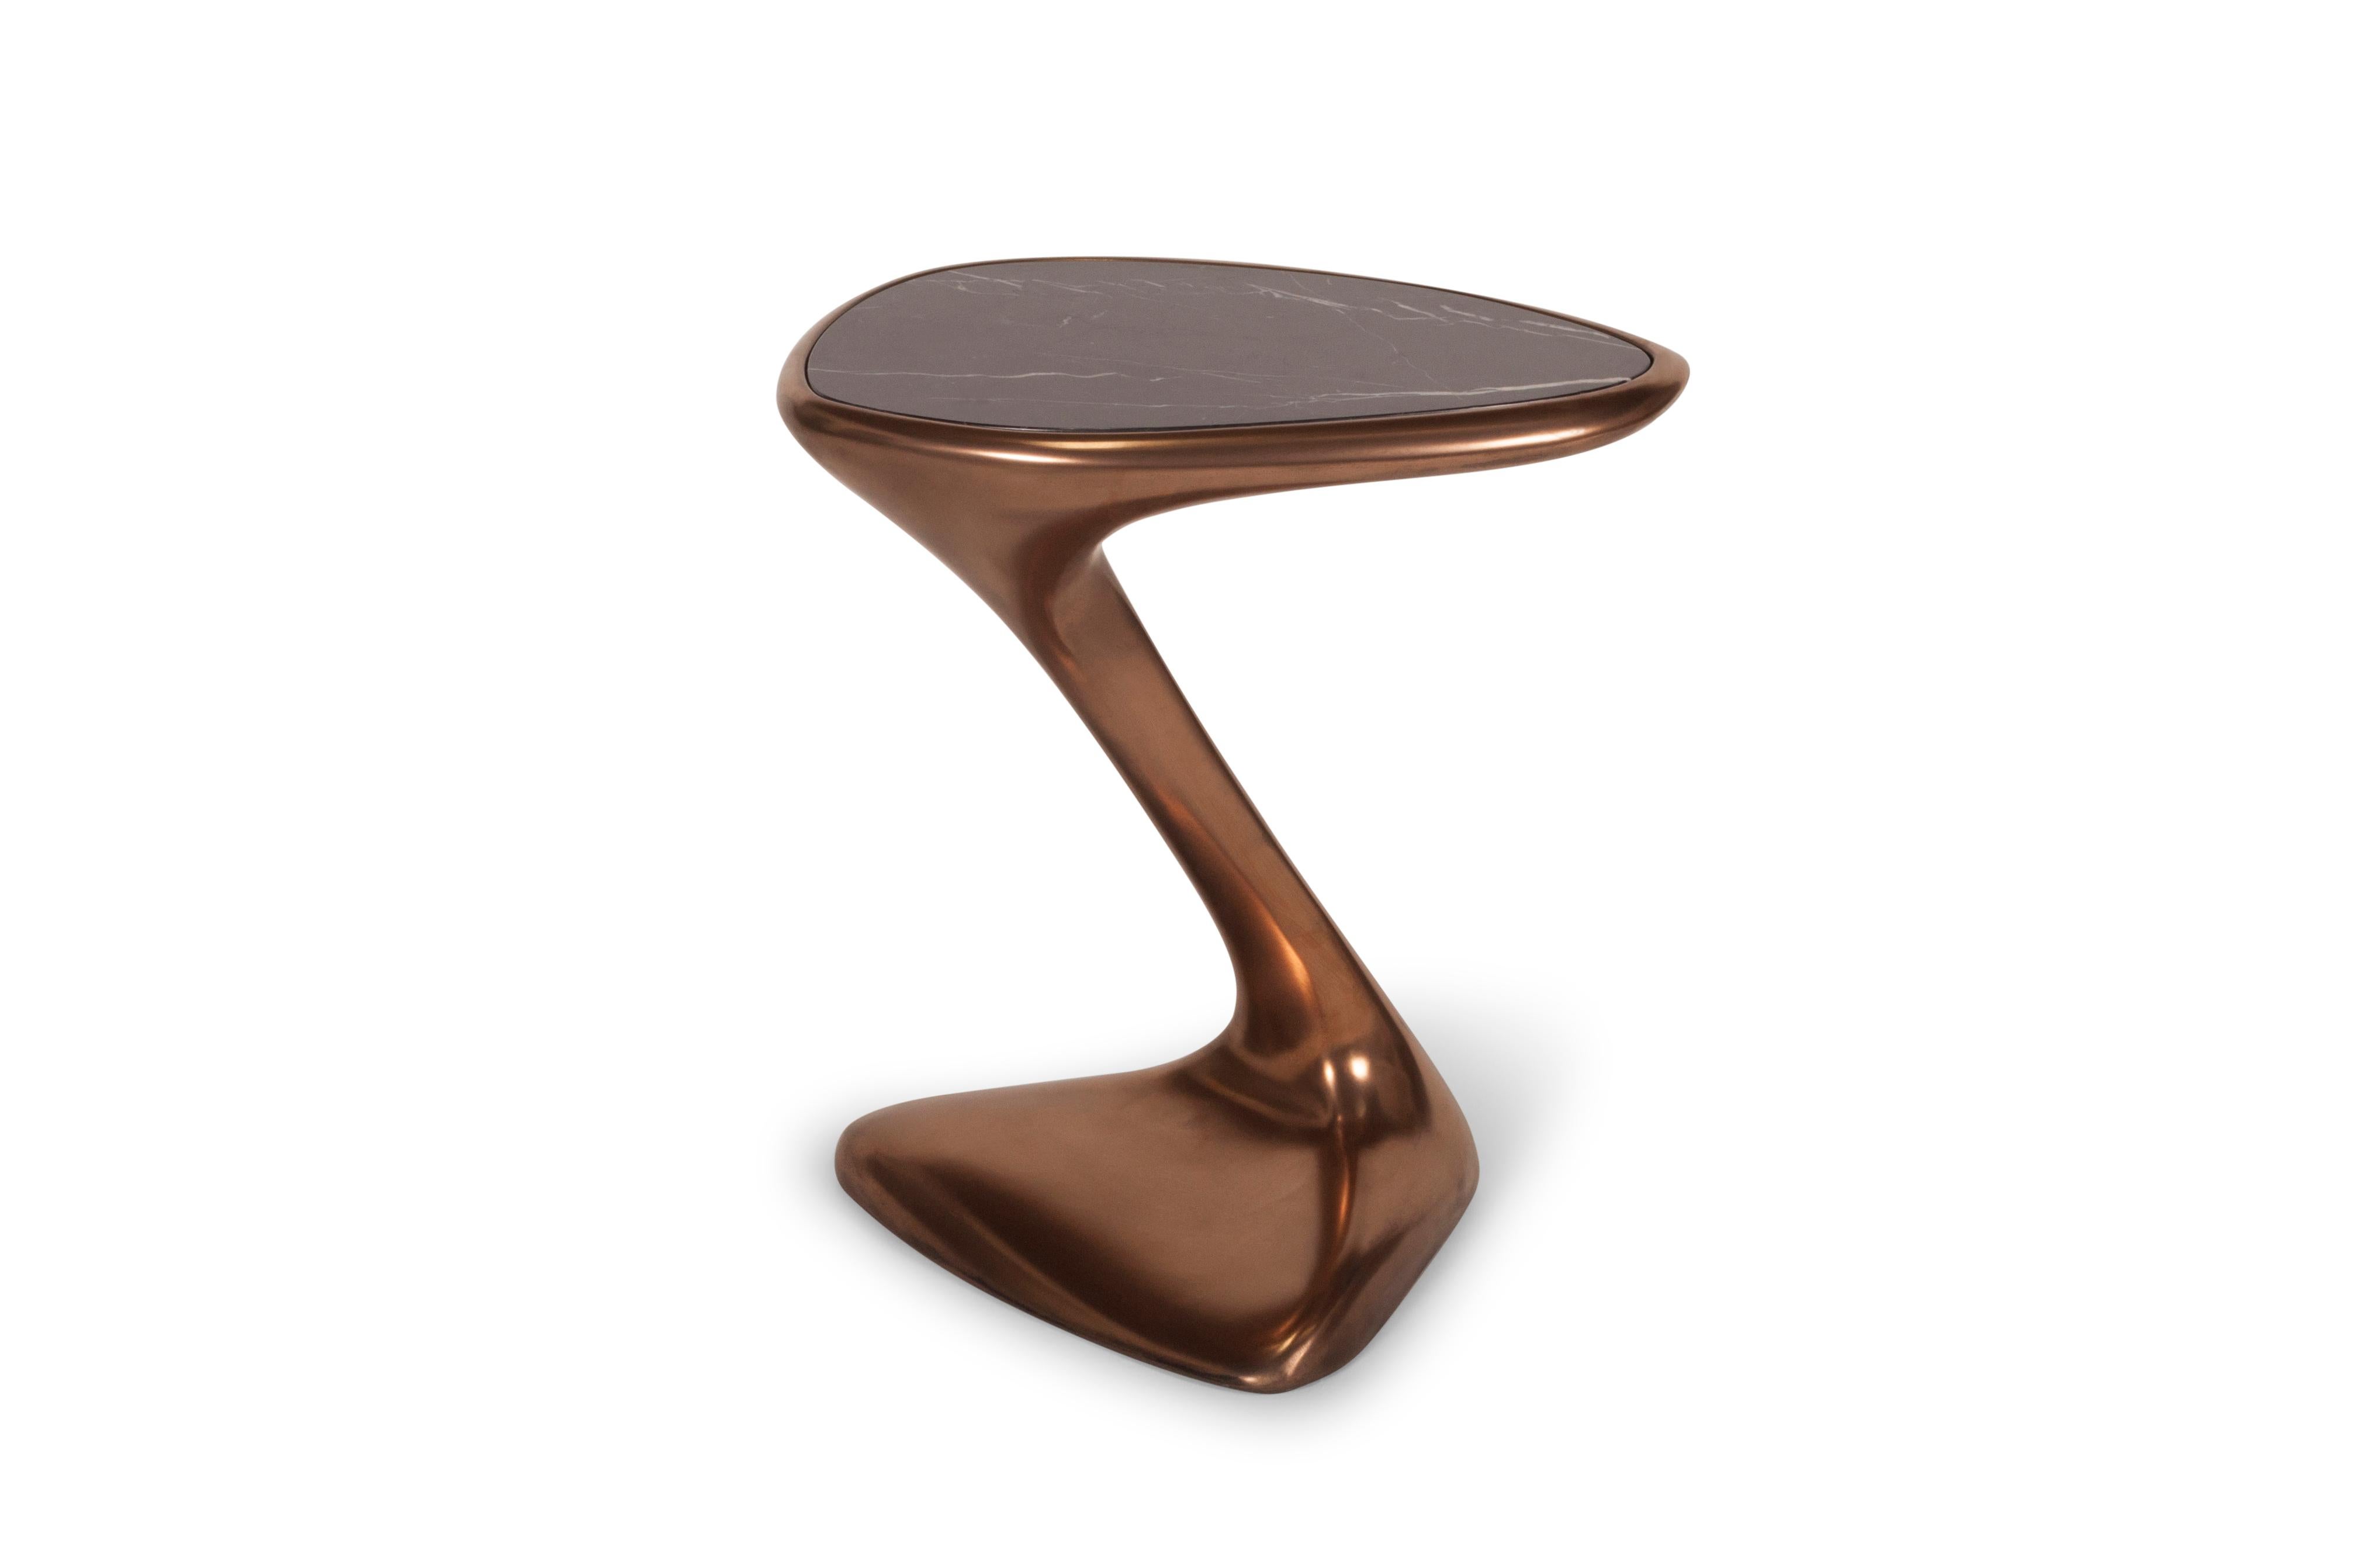 The palm side table is made out of wood with bronze finish with black marble top.

About Amorph: 
Amorph is a design and manufacturing company based in Los Angeles, California. We take pride in hand crafted designs connected to technology to create